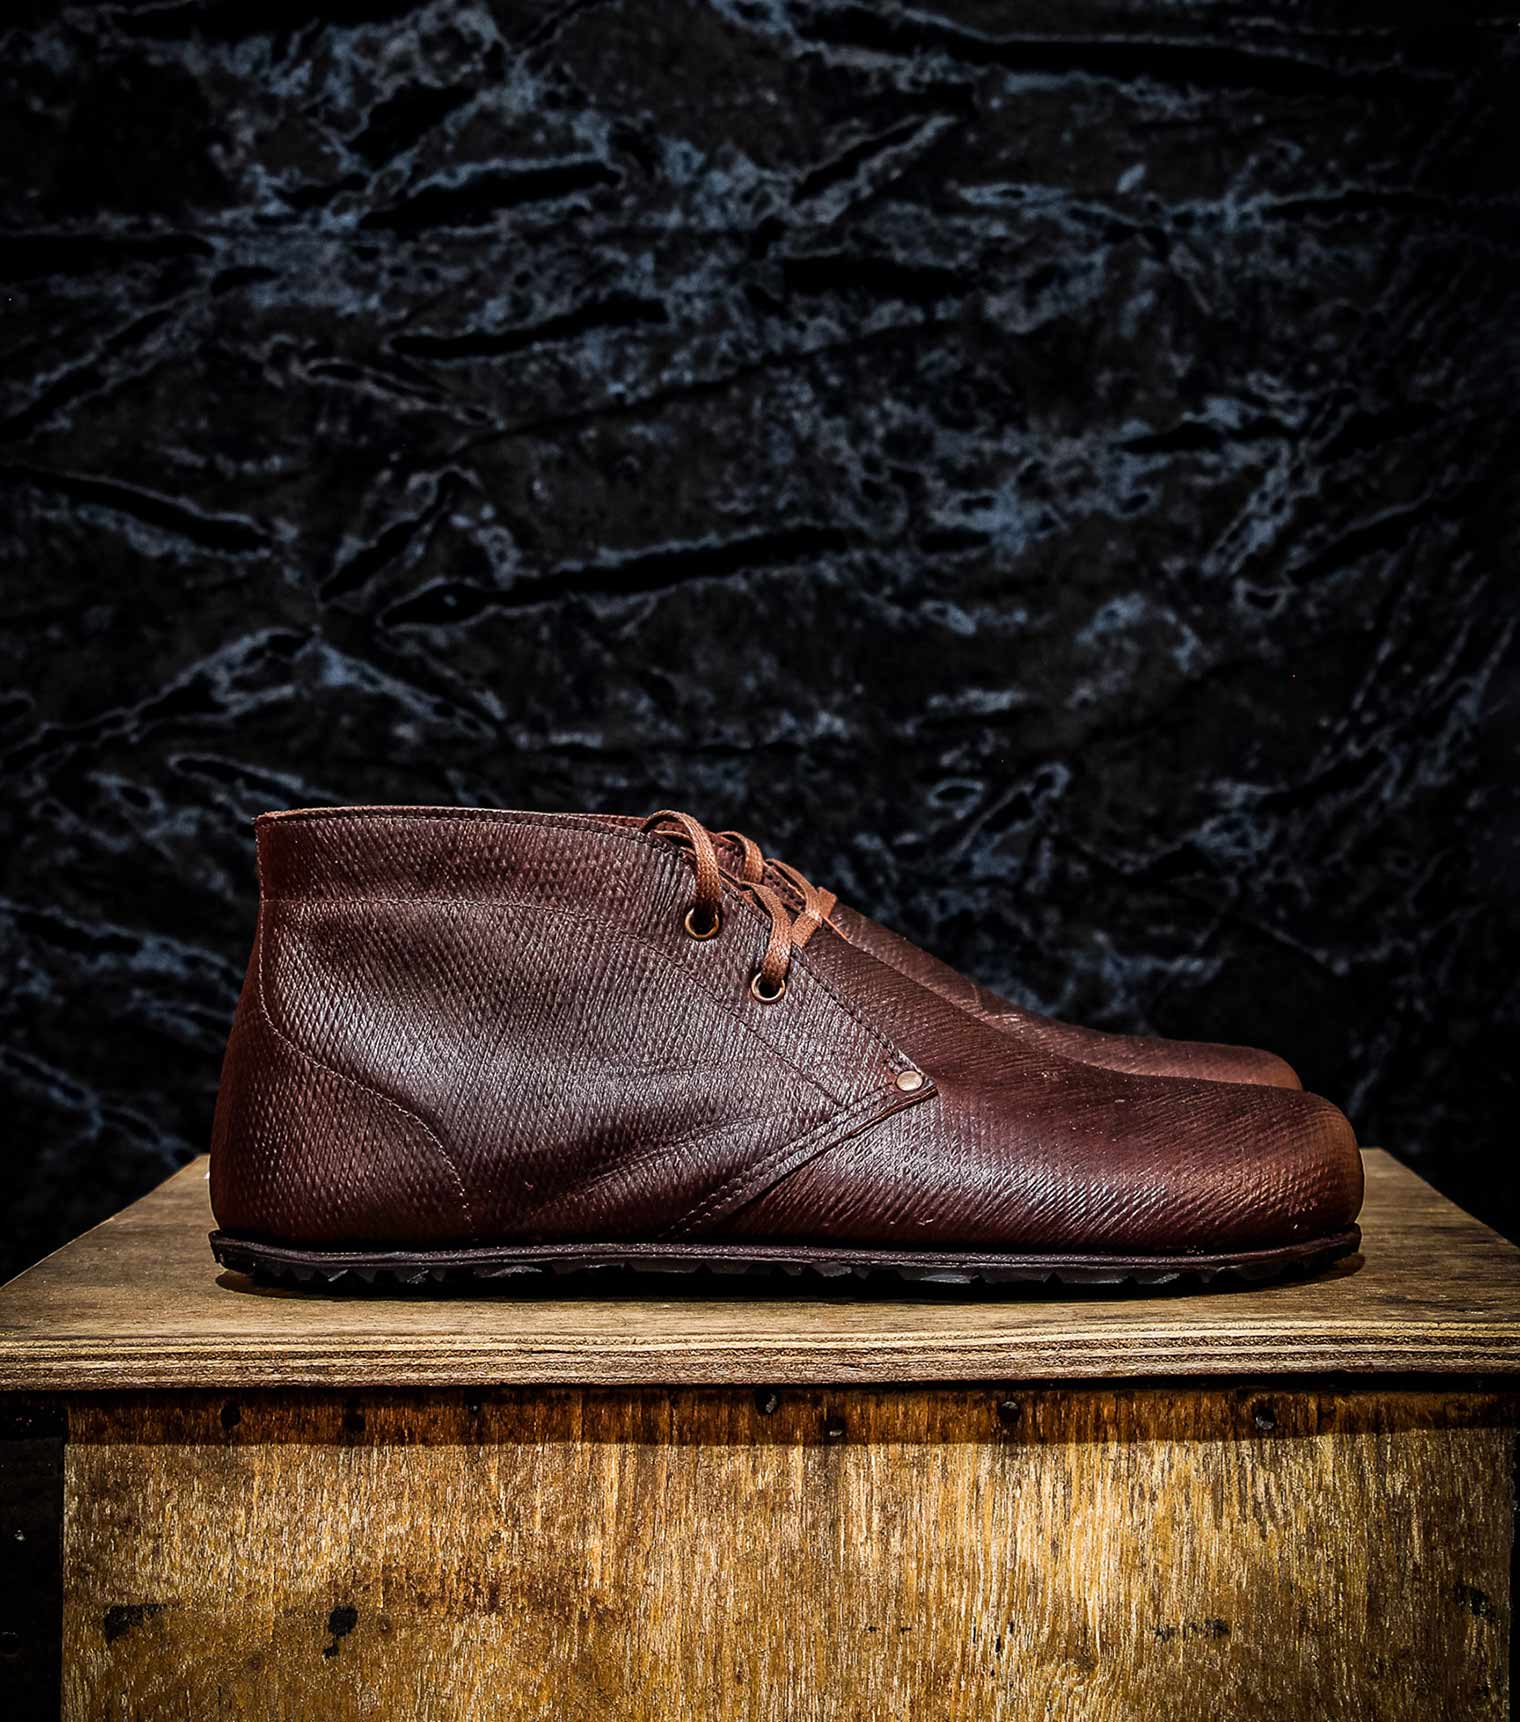 Chocolate Brown Barefoot Desert Boots in British Baker's Russian Leather